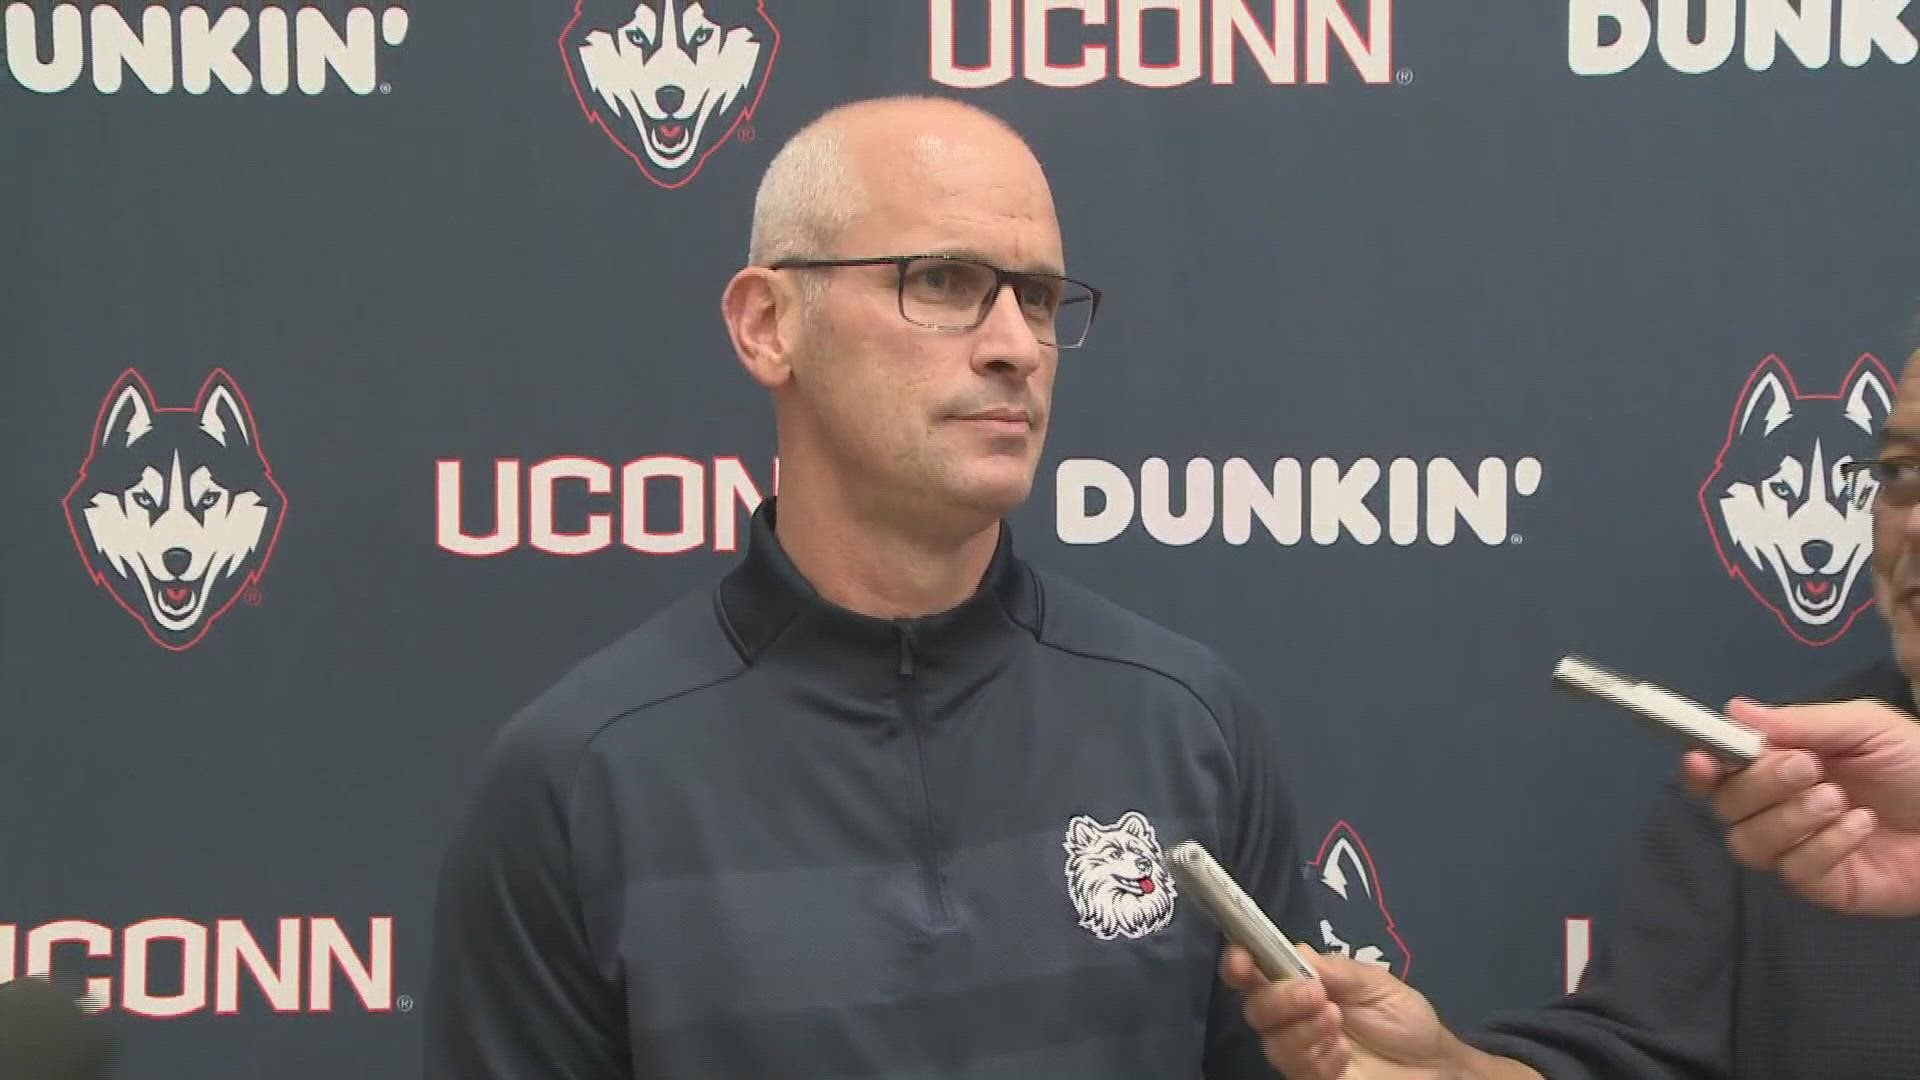 UConn men's basketball coach Dan Hurley talked Andre Jackon's recent finger injury as well as how some of the younger guys are beginning to take a larger role.